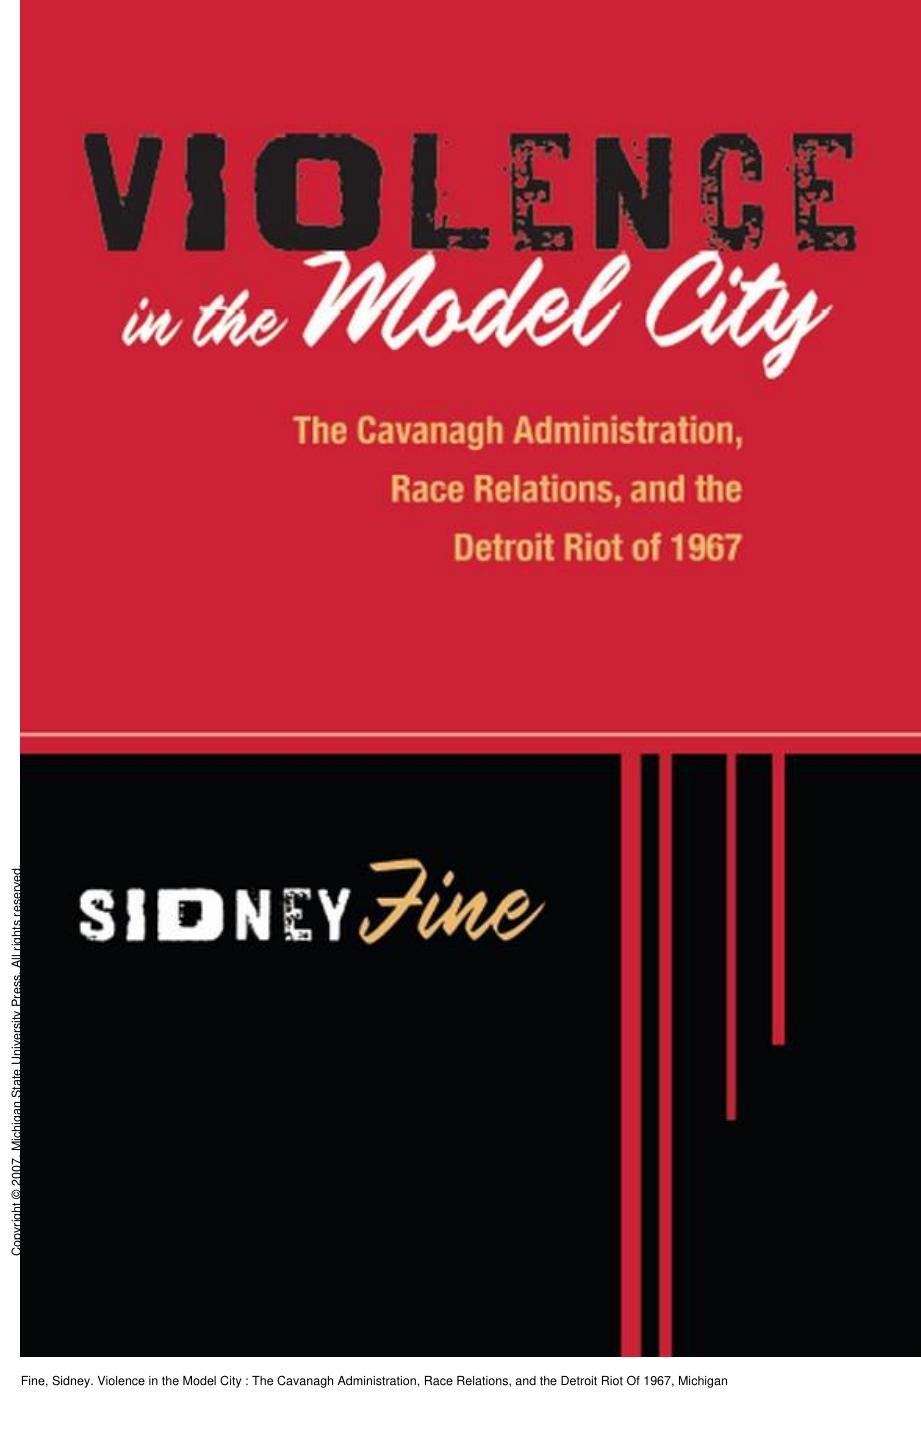 Violence in the Model City: The Cavanagh Administration, Race Relations, and the Detroit Riot Of 1967 by Sidney Fine